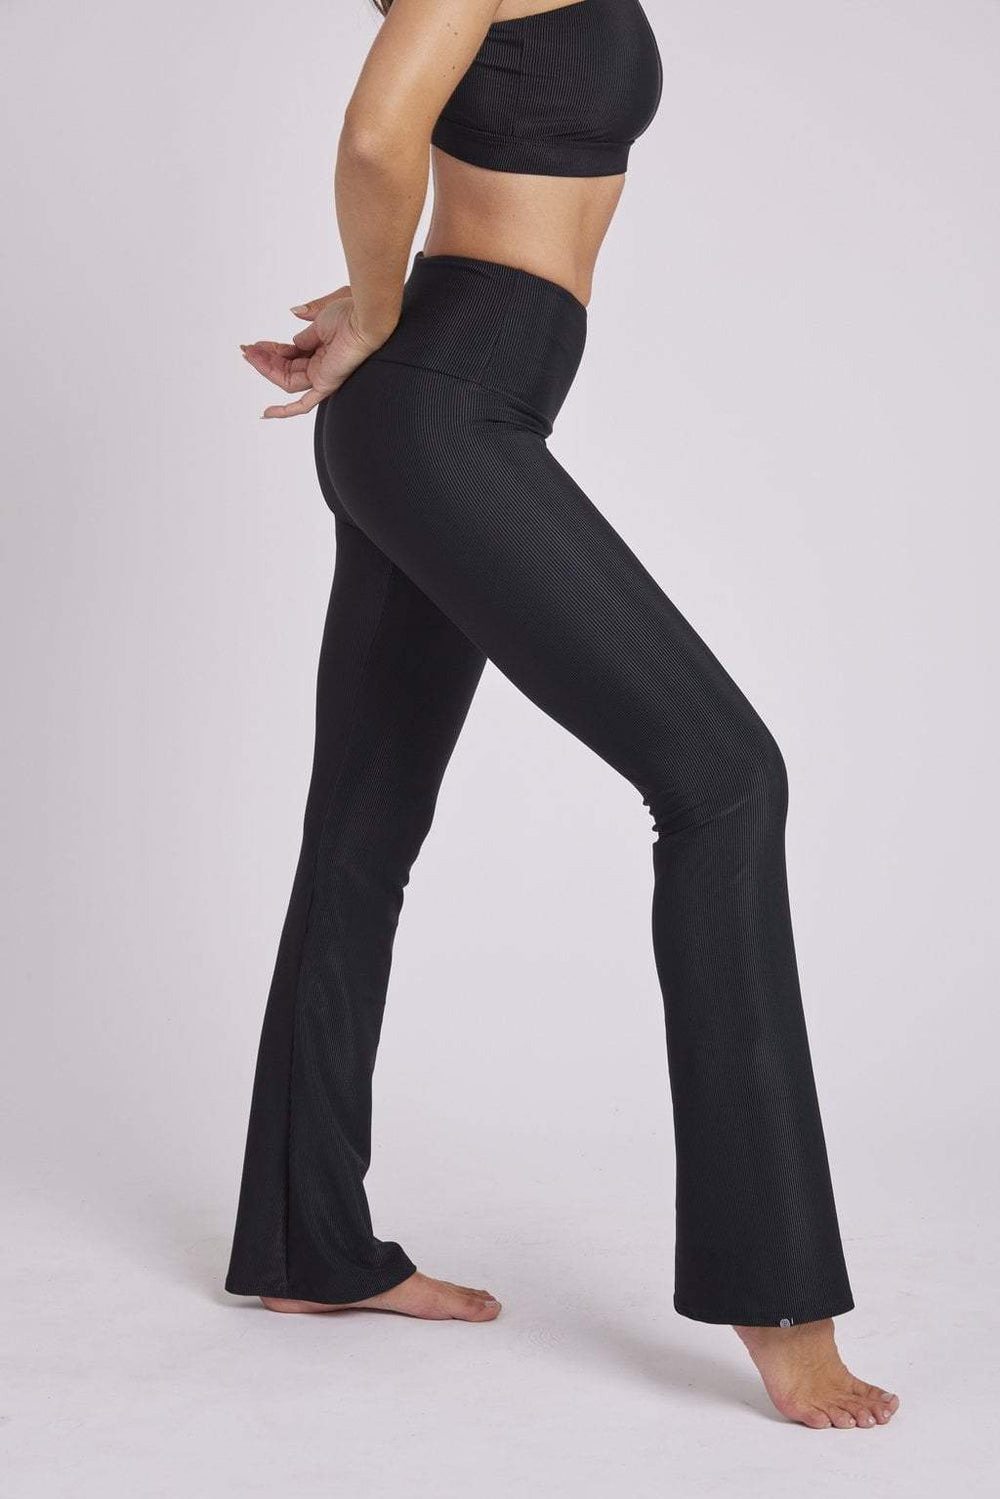 90 Degree By Reflex High Waist Flare Yoga Pant with Palestine